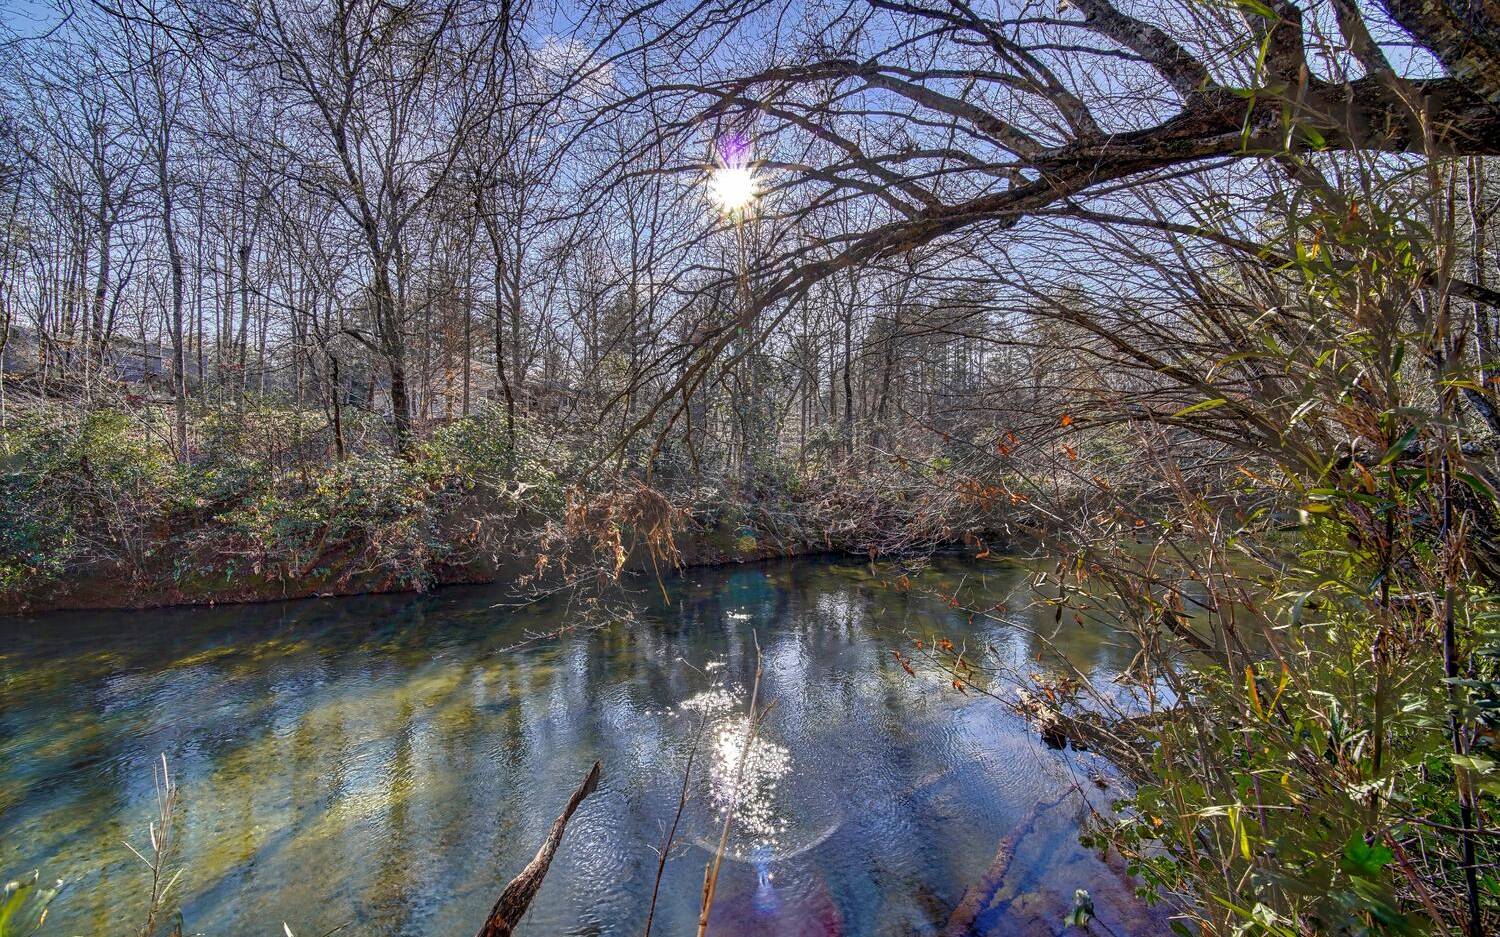 Ready to build your Dream Home on the tranquil Nottely River? This is your Opportunity! This beautiful lot boasts 150' +/- of River frontage in a quiet neighborhood conveniently located less than 3 miles from town! Enjoy what the mountain life has to offer with scenic views, excellent trout fishing, close proximity to Vogel State park, waterfalls, and hiking opportunities! WELCOME HOME!